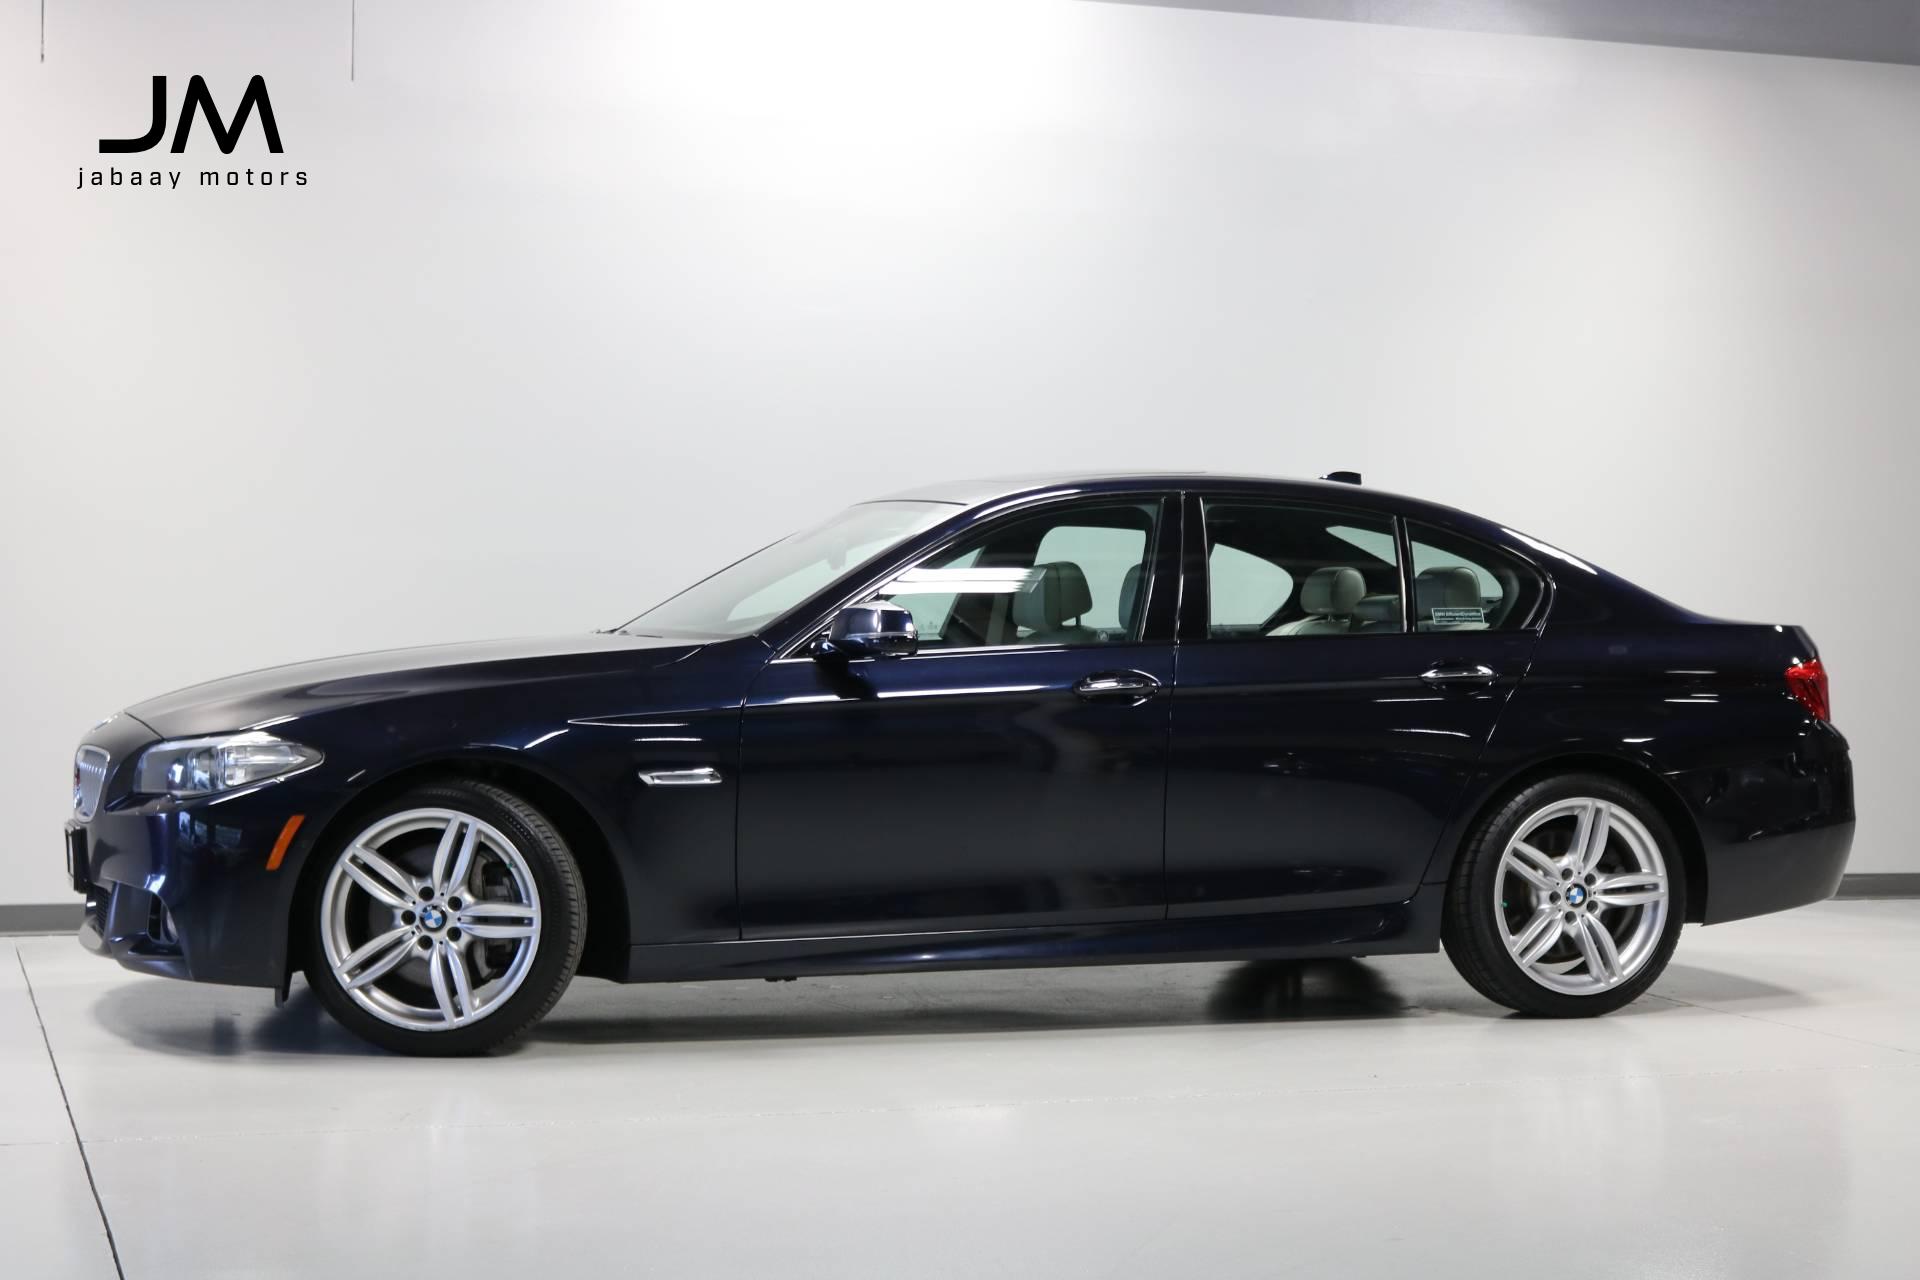 Used 2014 Bmw 5 Series 550i Xdrive M Sport For Sale Sold Jabaay